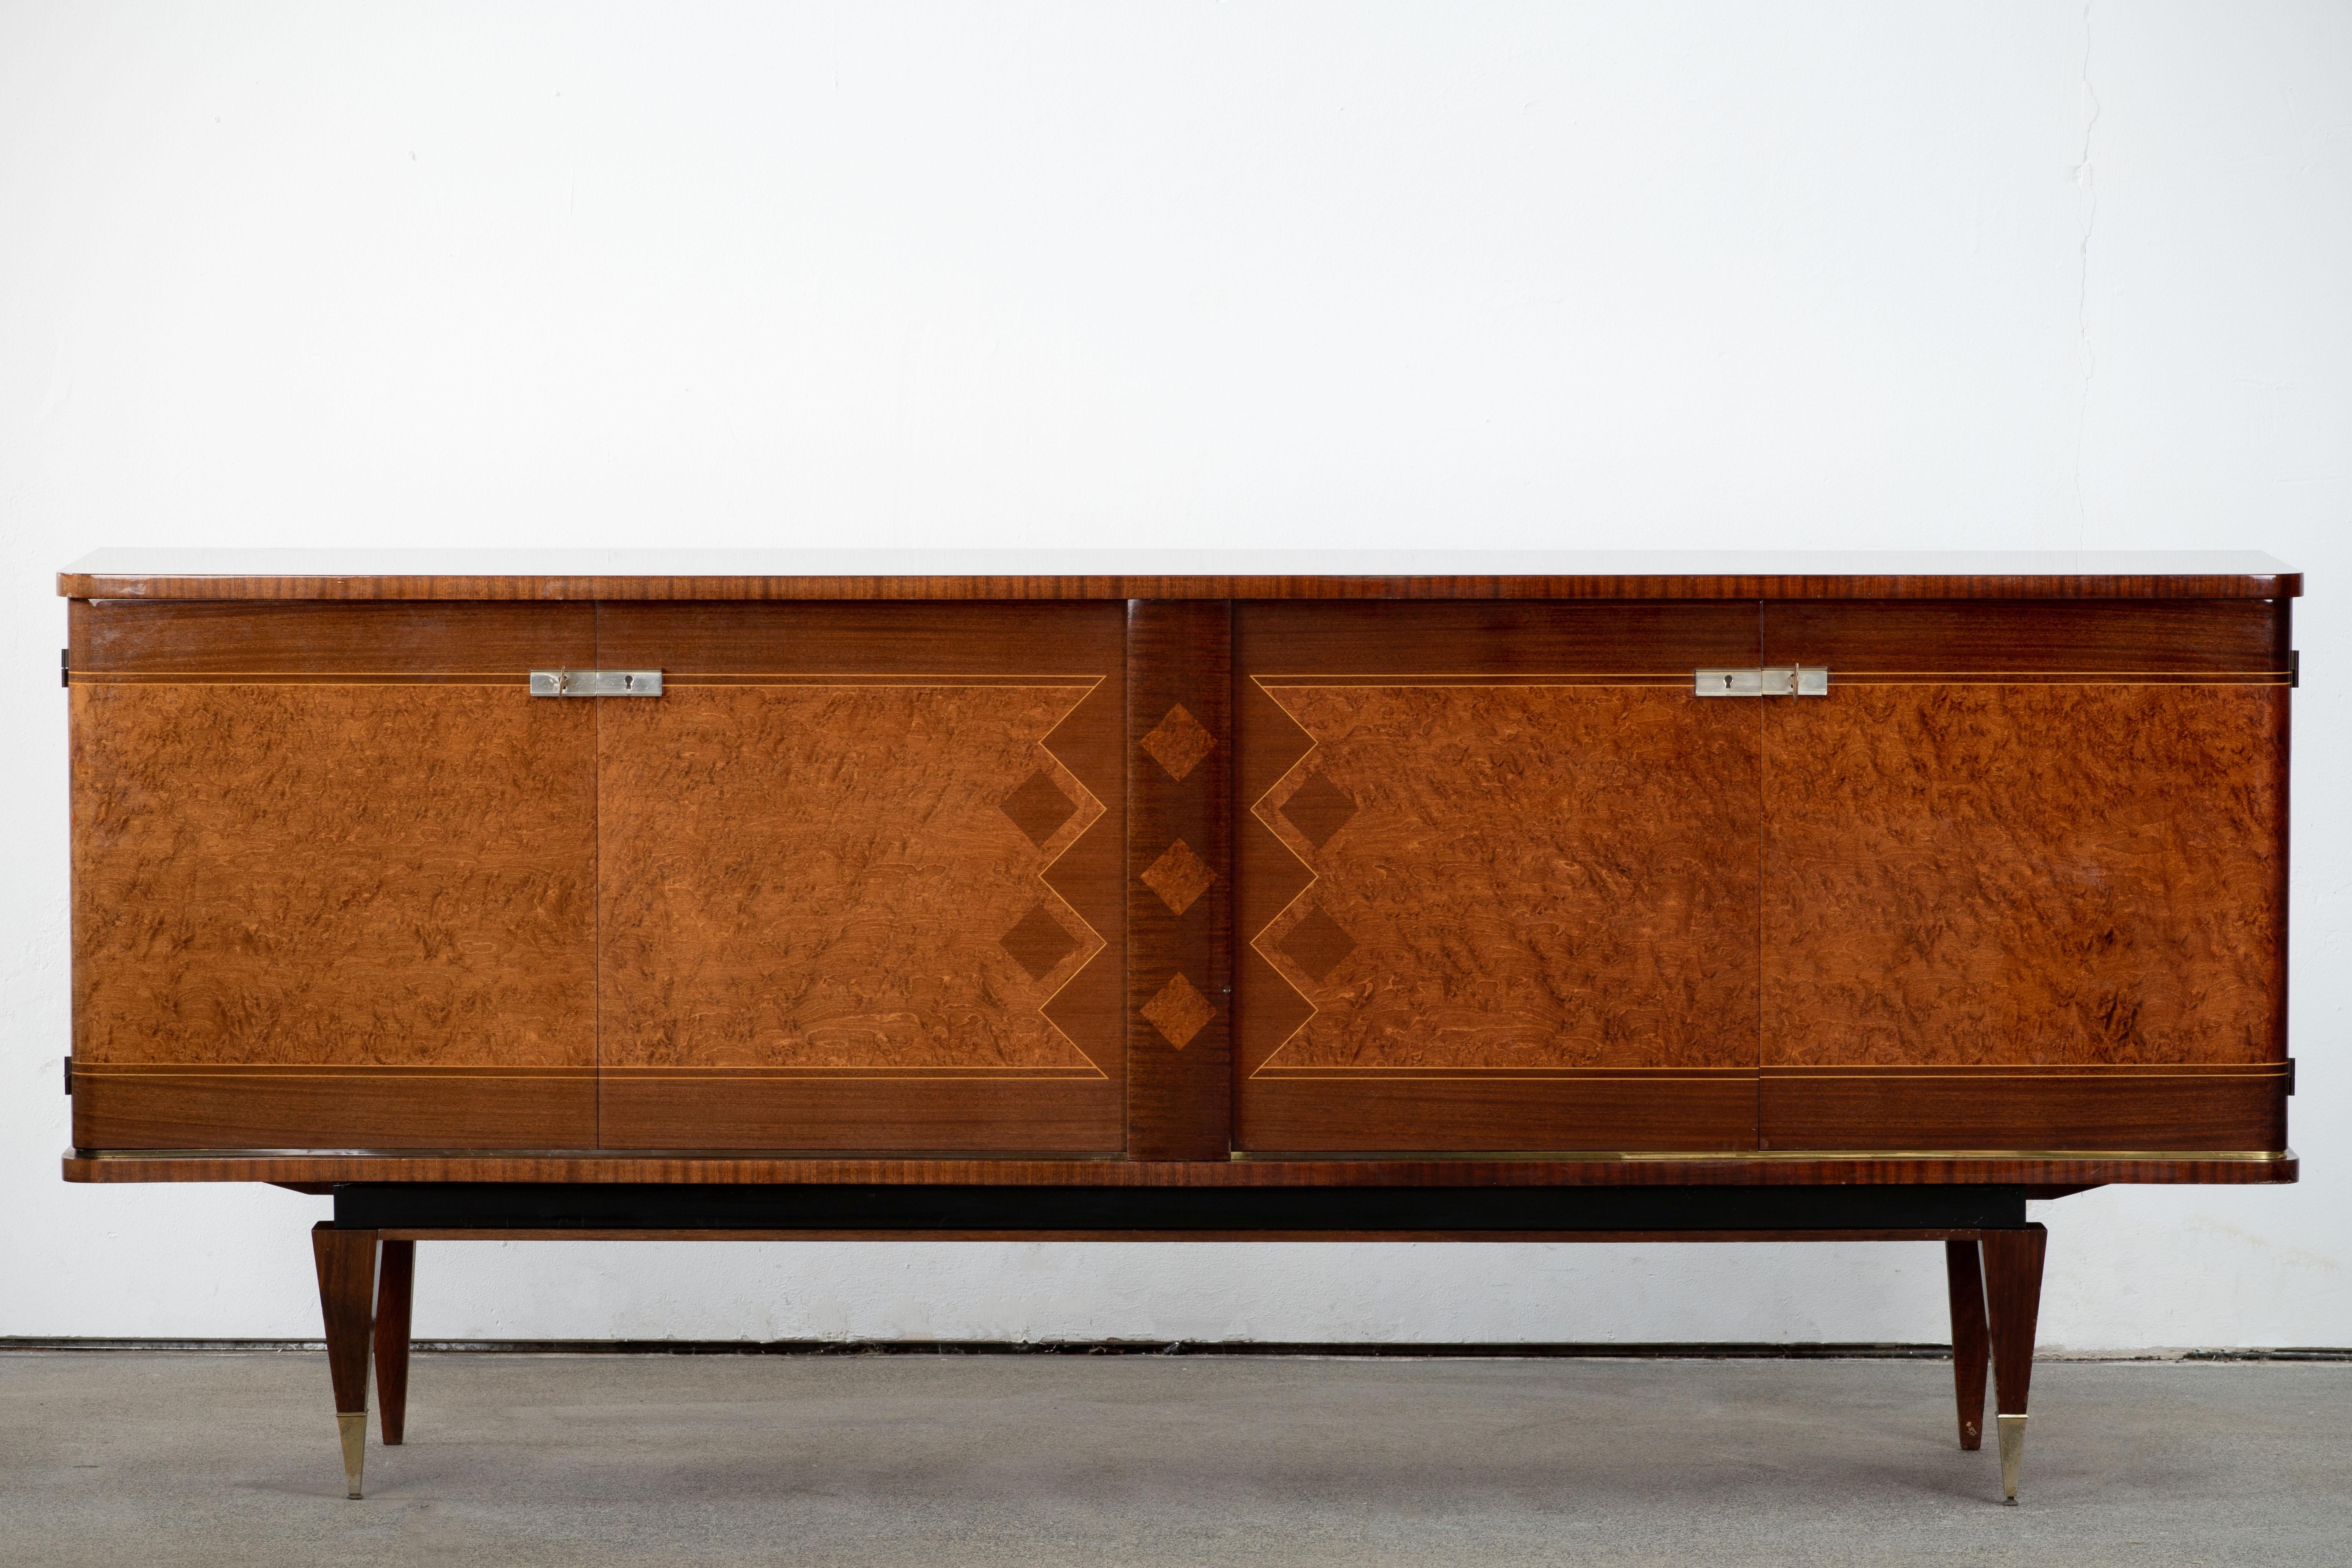 French Art Deco sideboard, credenza. The sideboard features stunning Elm Burl wood grain with a geometric pattern in the center. It offers ample storage, with shelve behind the doors. Both sides of the cabinet lock, and two keys are included. The